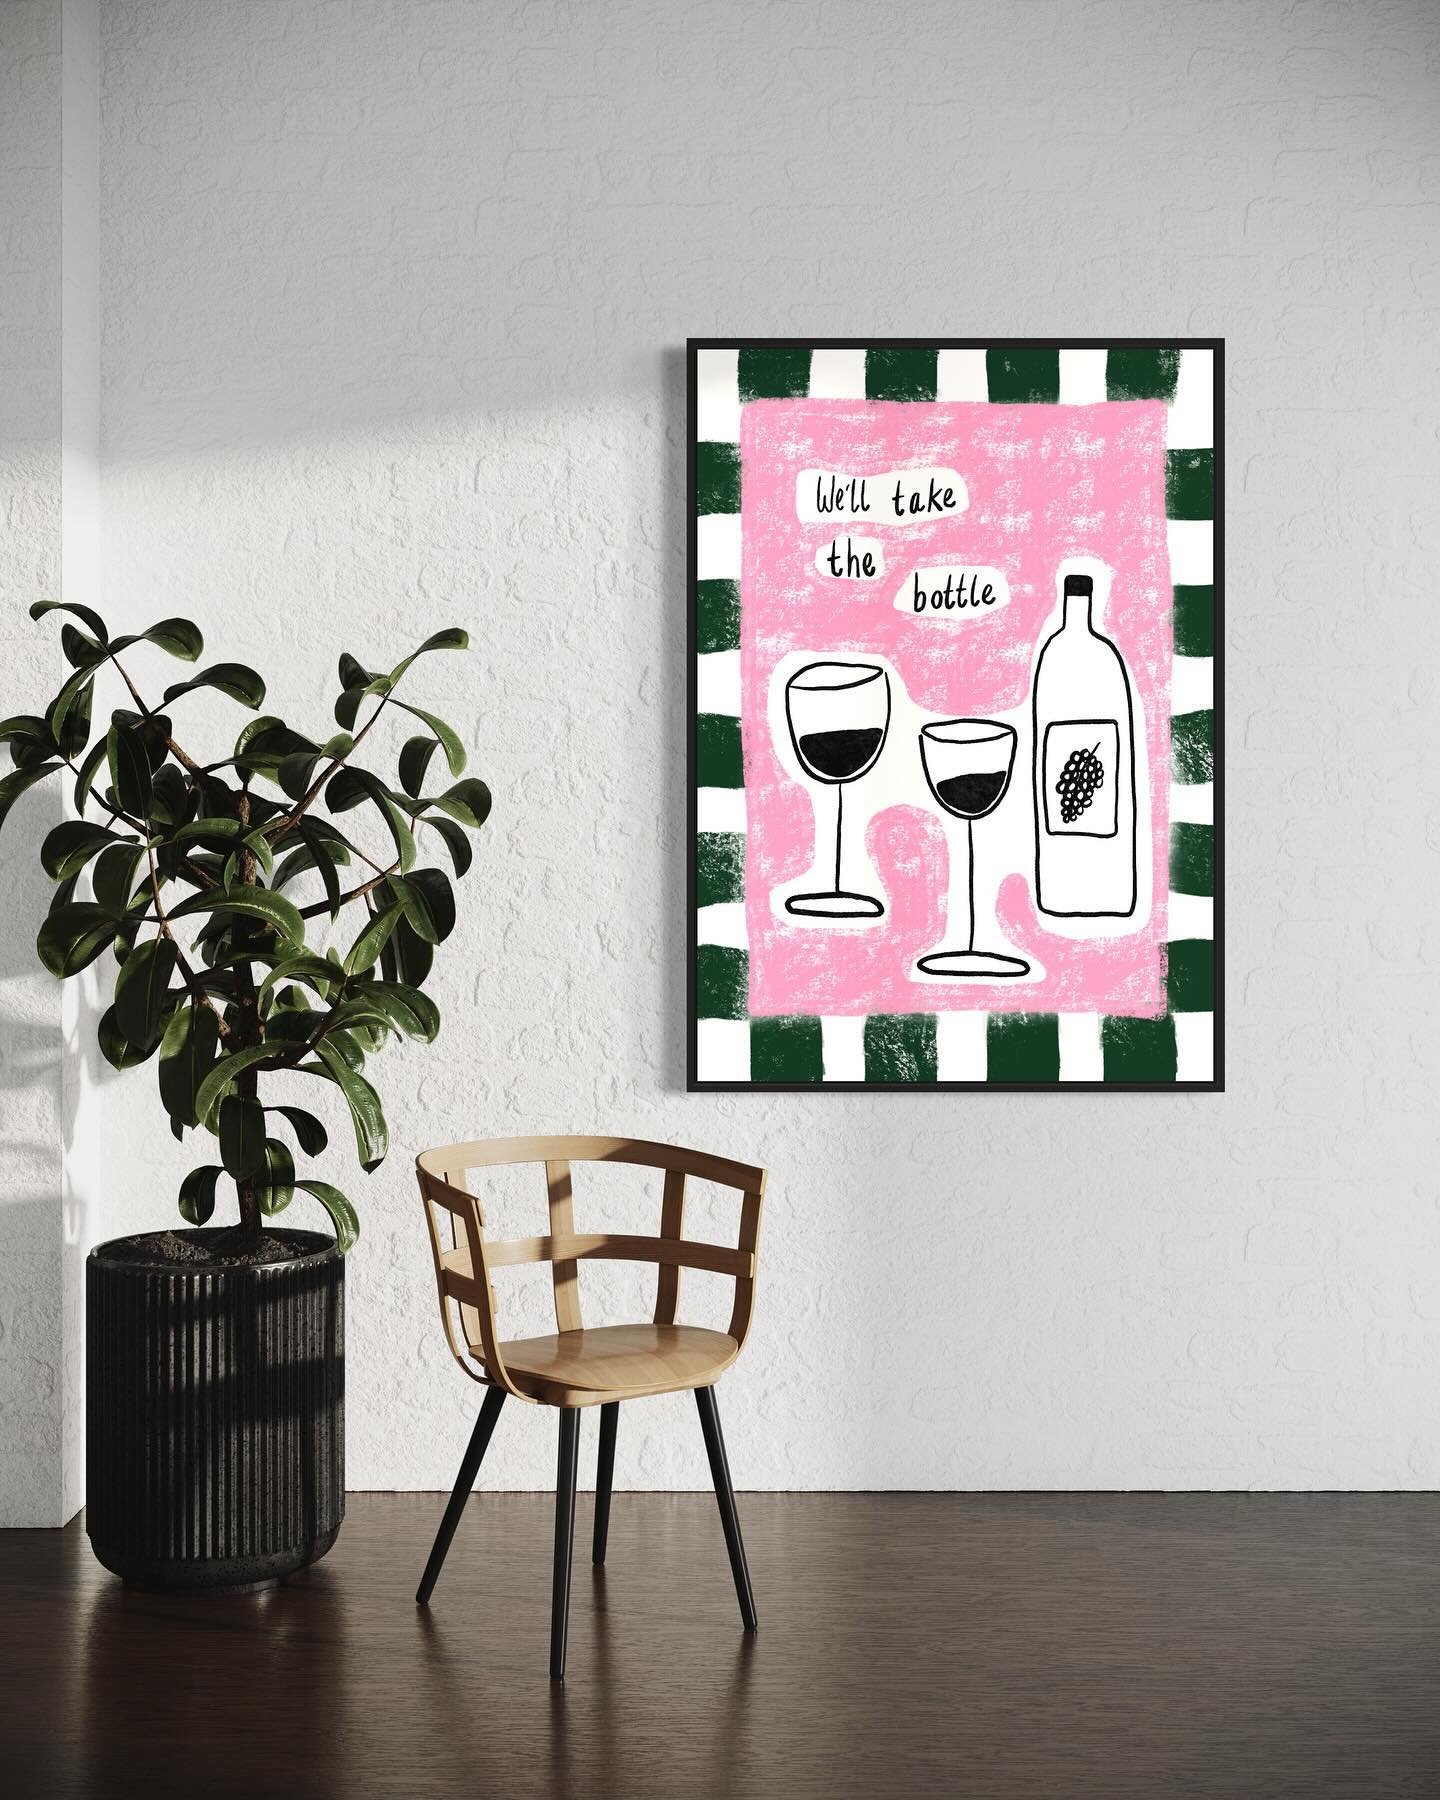 Mood all summer 🍷🍾

Some new prints all on my Etsy Prezprints.Etsy.com (link in bio) 

Will also be on my own website this weekend ready for the website launch ☀️

#prints #artprints #wallart #artprintinspo #wallartprint #wineprint #summervibes #wi